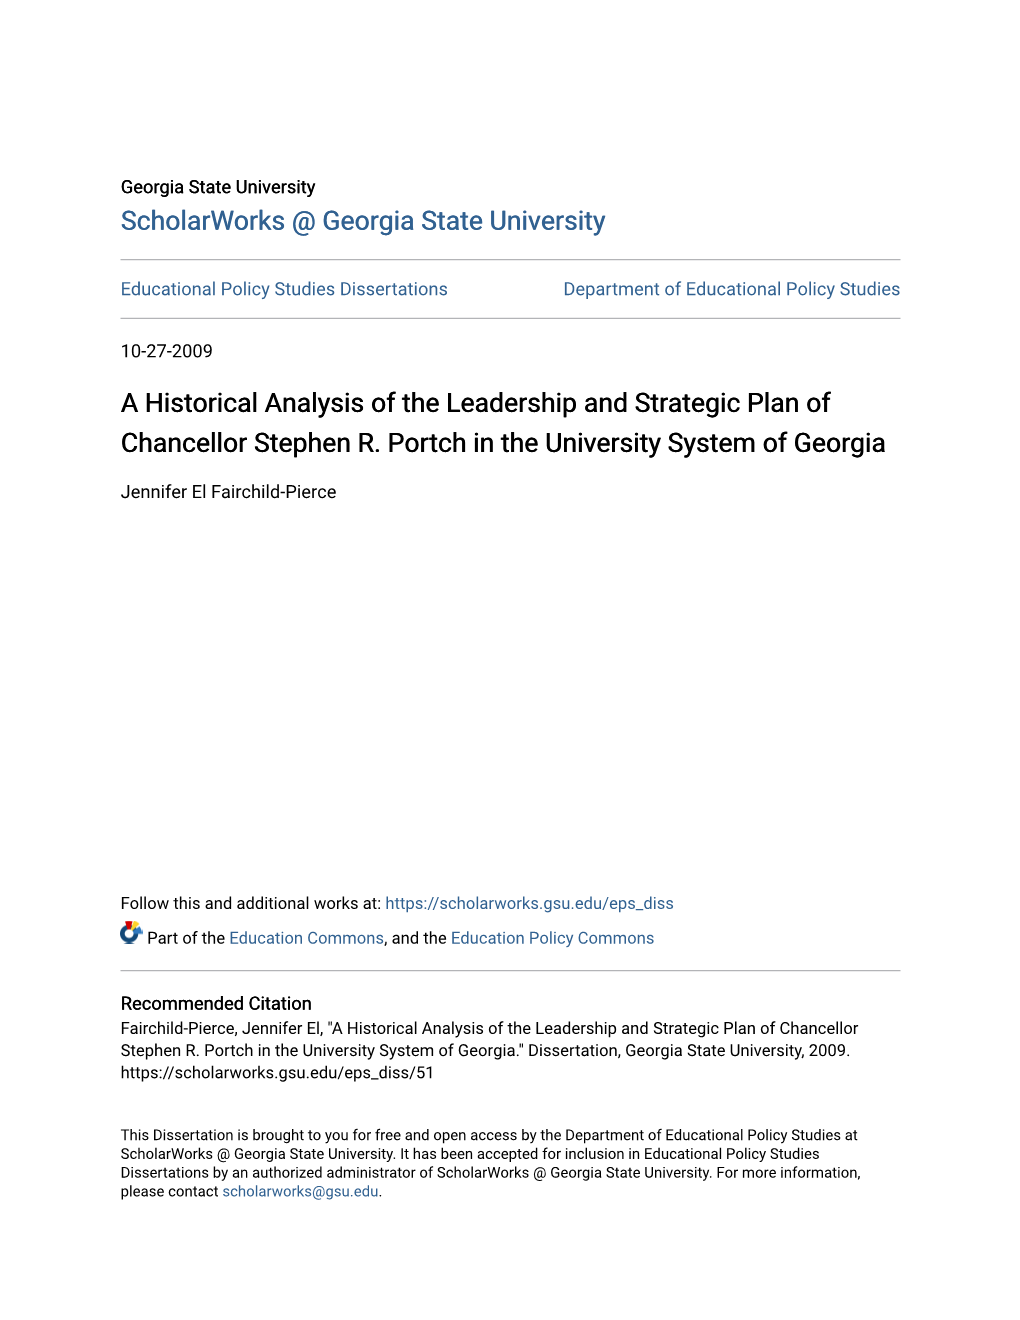 A Historical Analysis of the Leadership and Strategic Plan of Chancellor Stephen R